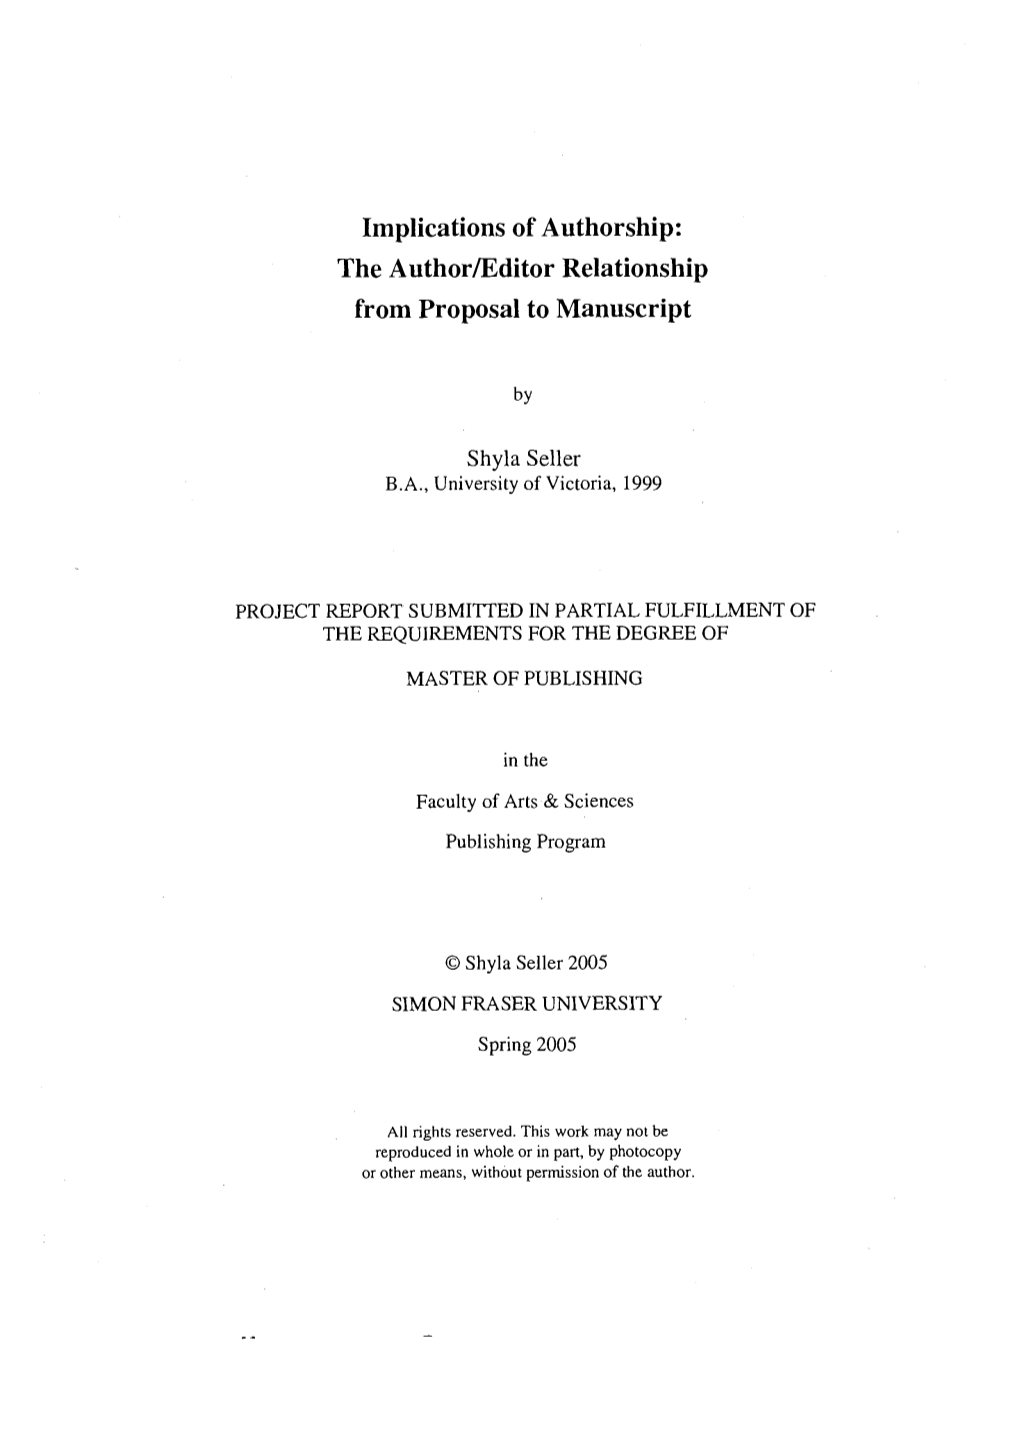 Implications of Authorship: the Authorieditor Relationship from Proposal to Manuscript